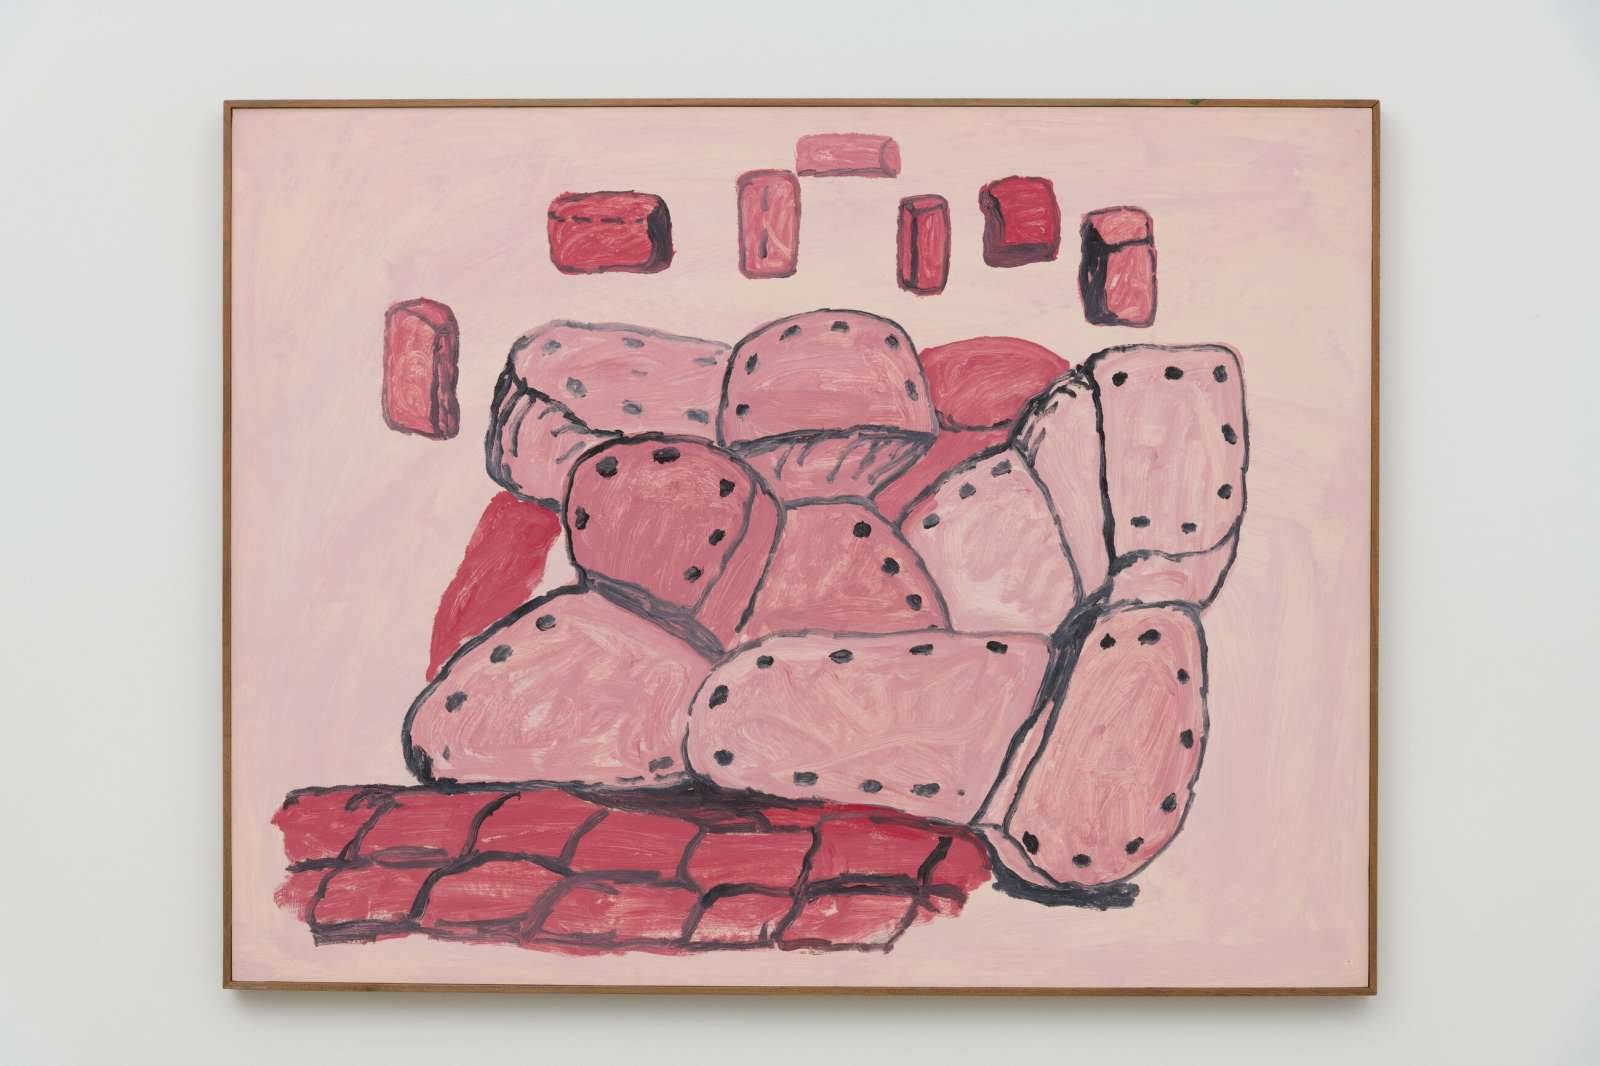 Philip Guston, “Untitled” (1971). € 1 434 426 €. Courtesy of Hauser & Wirth Gallery
